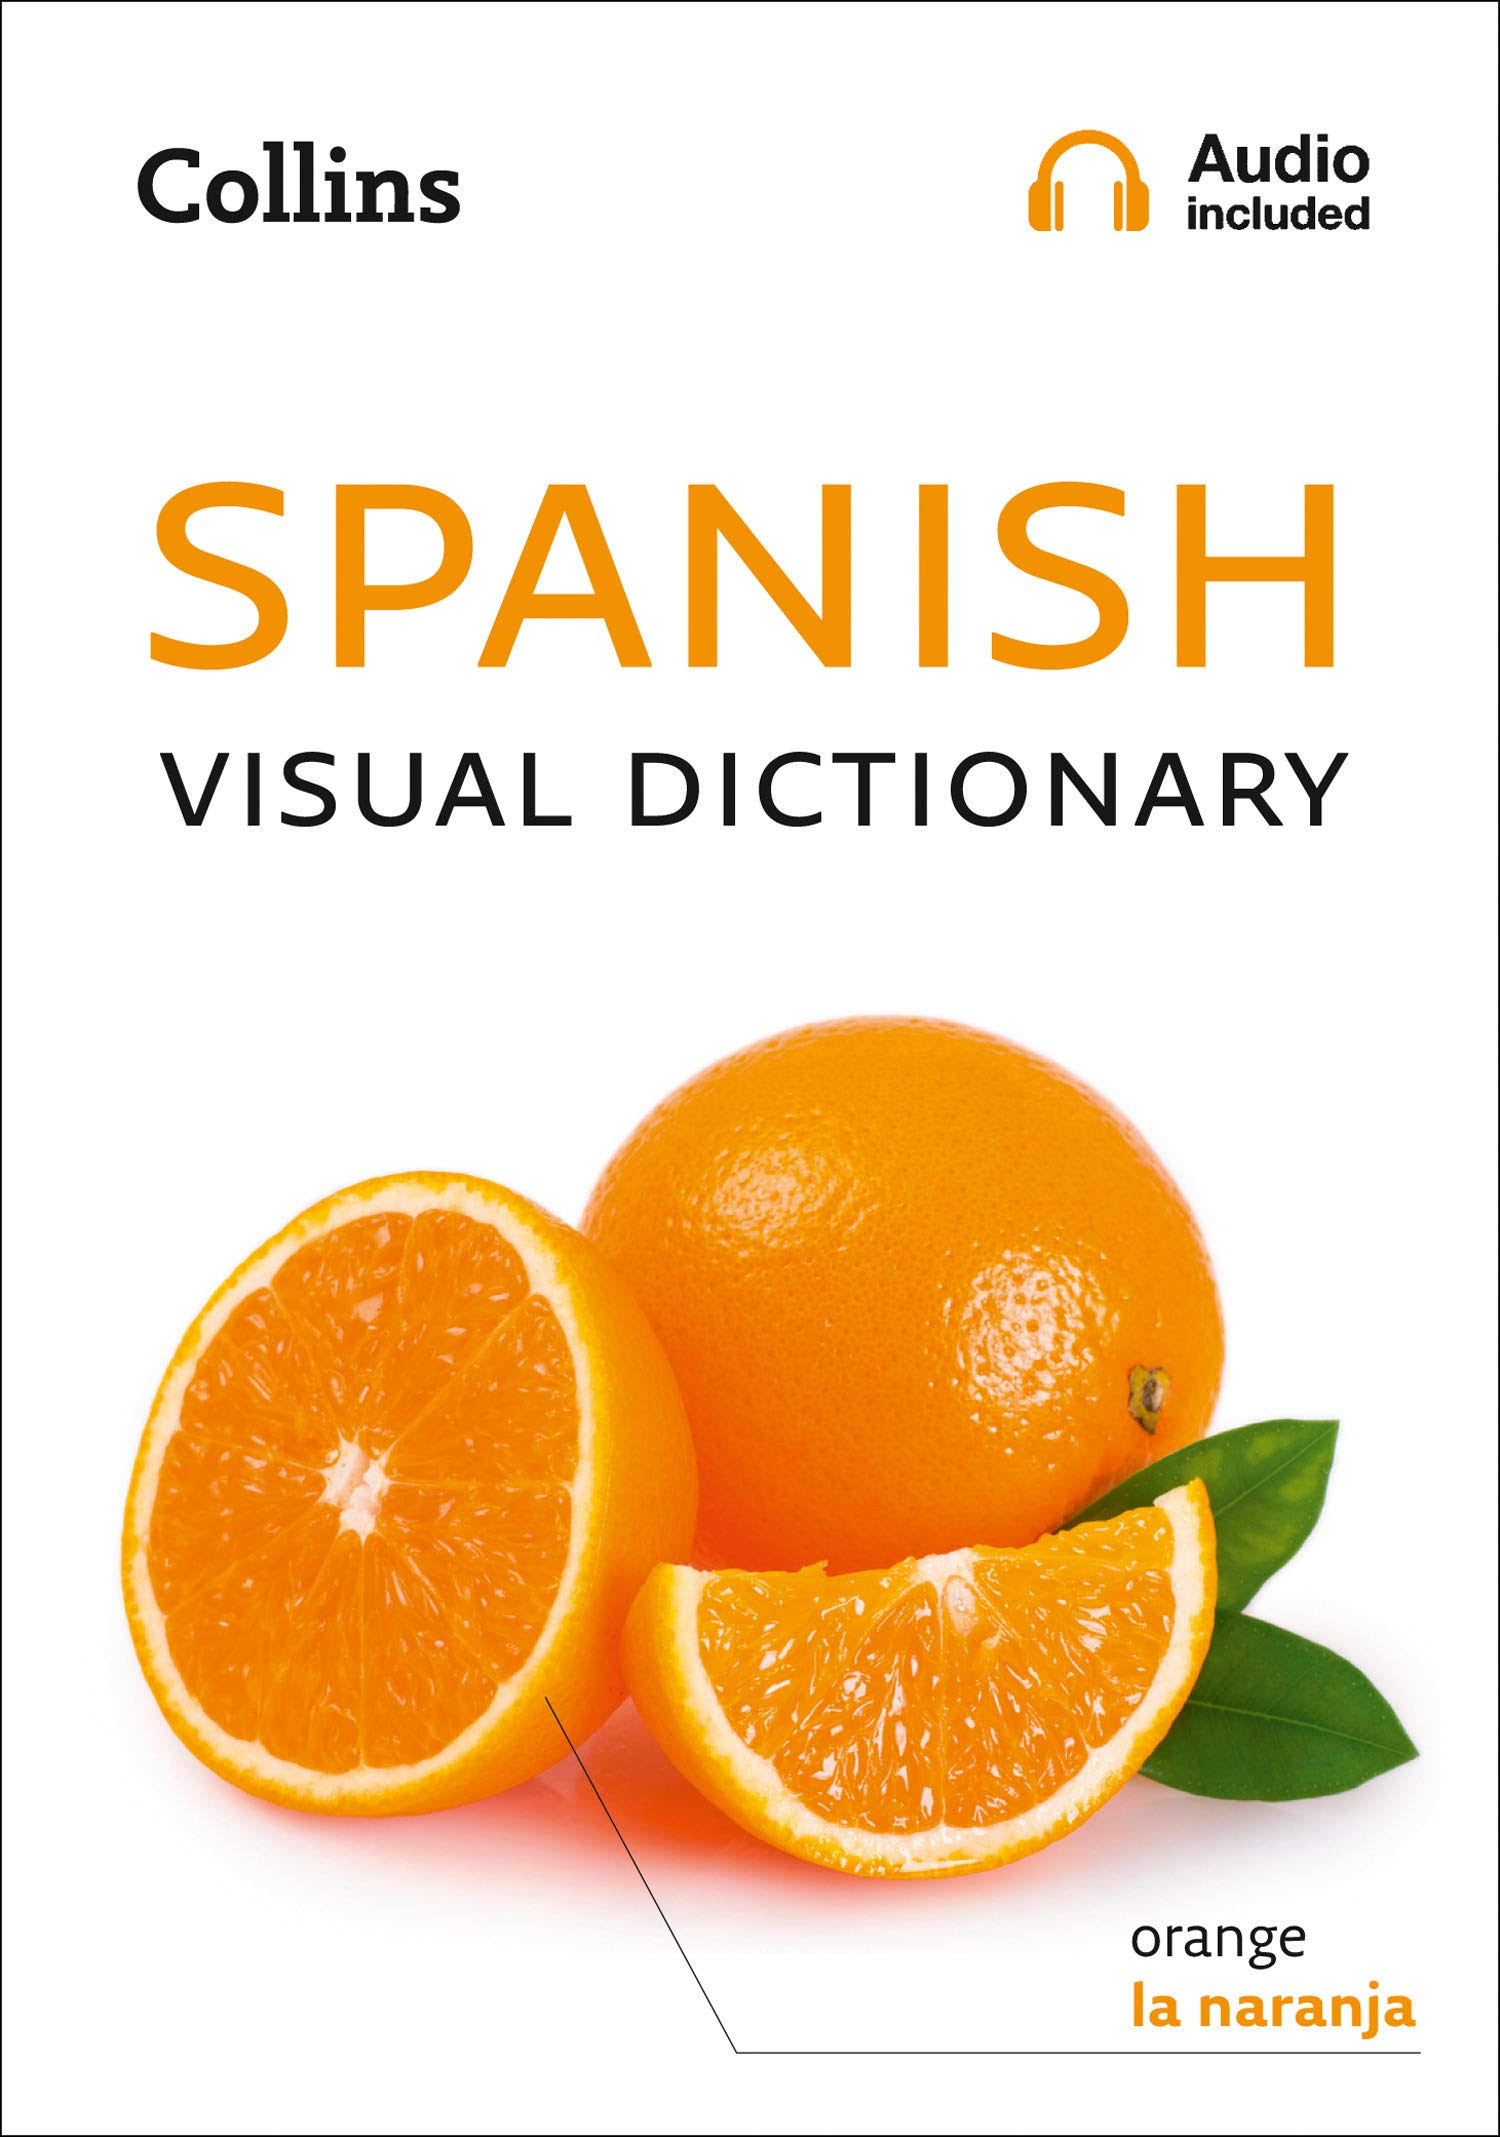 Collins Spanish Visual Dictionary [Book]